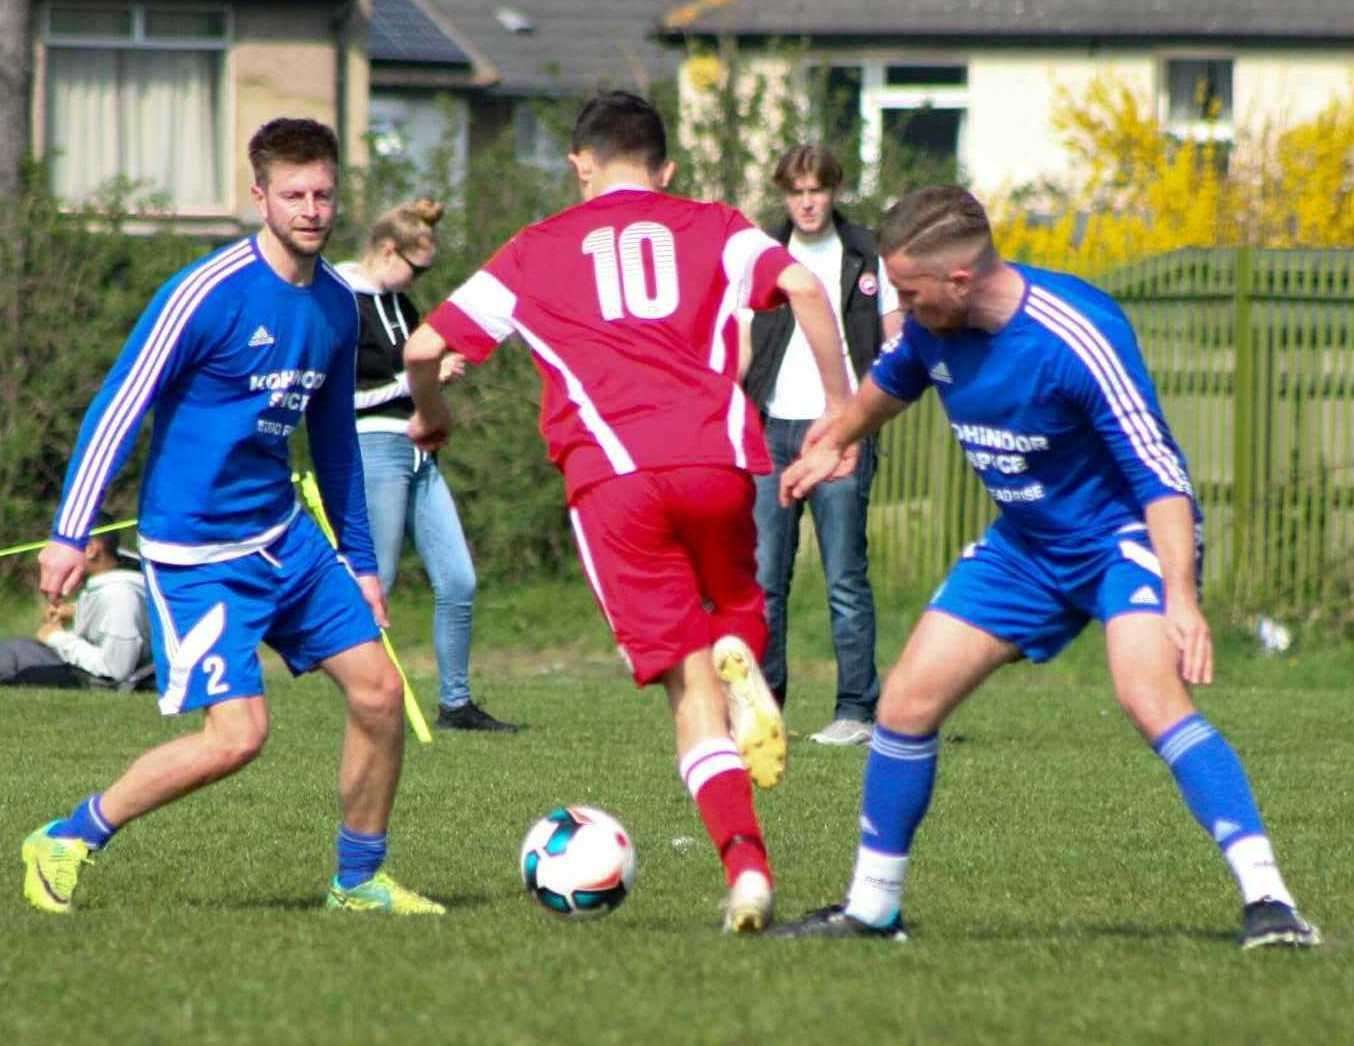 A football match was held at the college in memory of Jordan Dawes